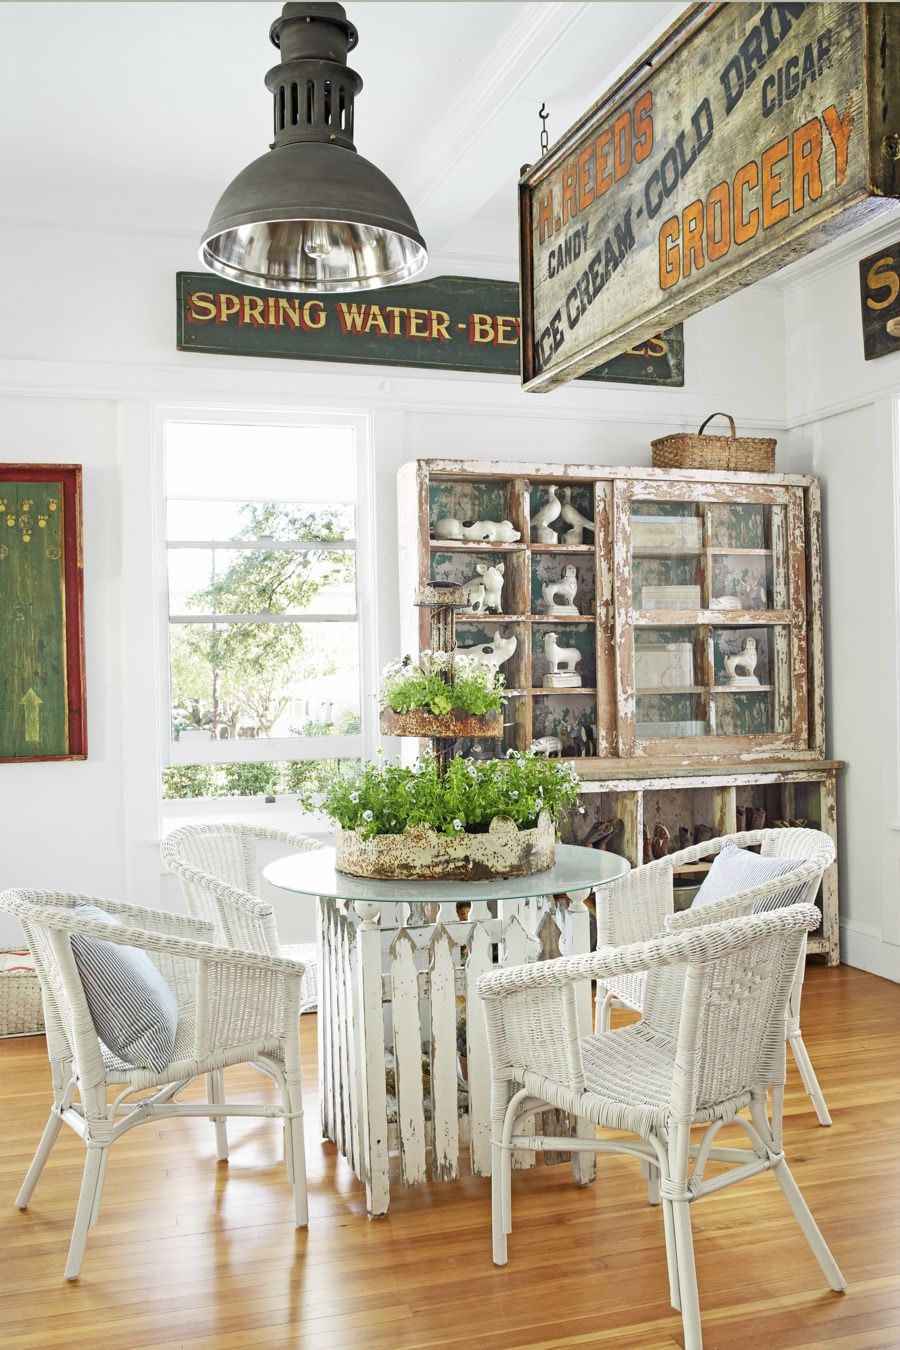 https://hips.hearstapps.com/hmg-prod/images/breakfast-nook-ideas-upcycled-table-1580938071.jpg?crop=0.862895493767977xw:1xh;center,top&resize=980:*